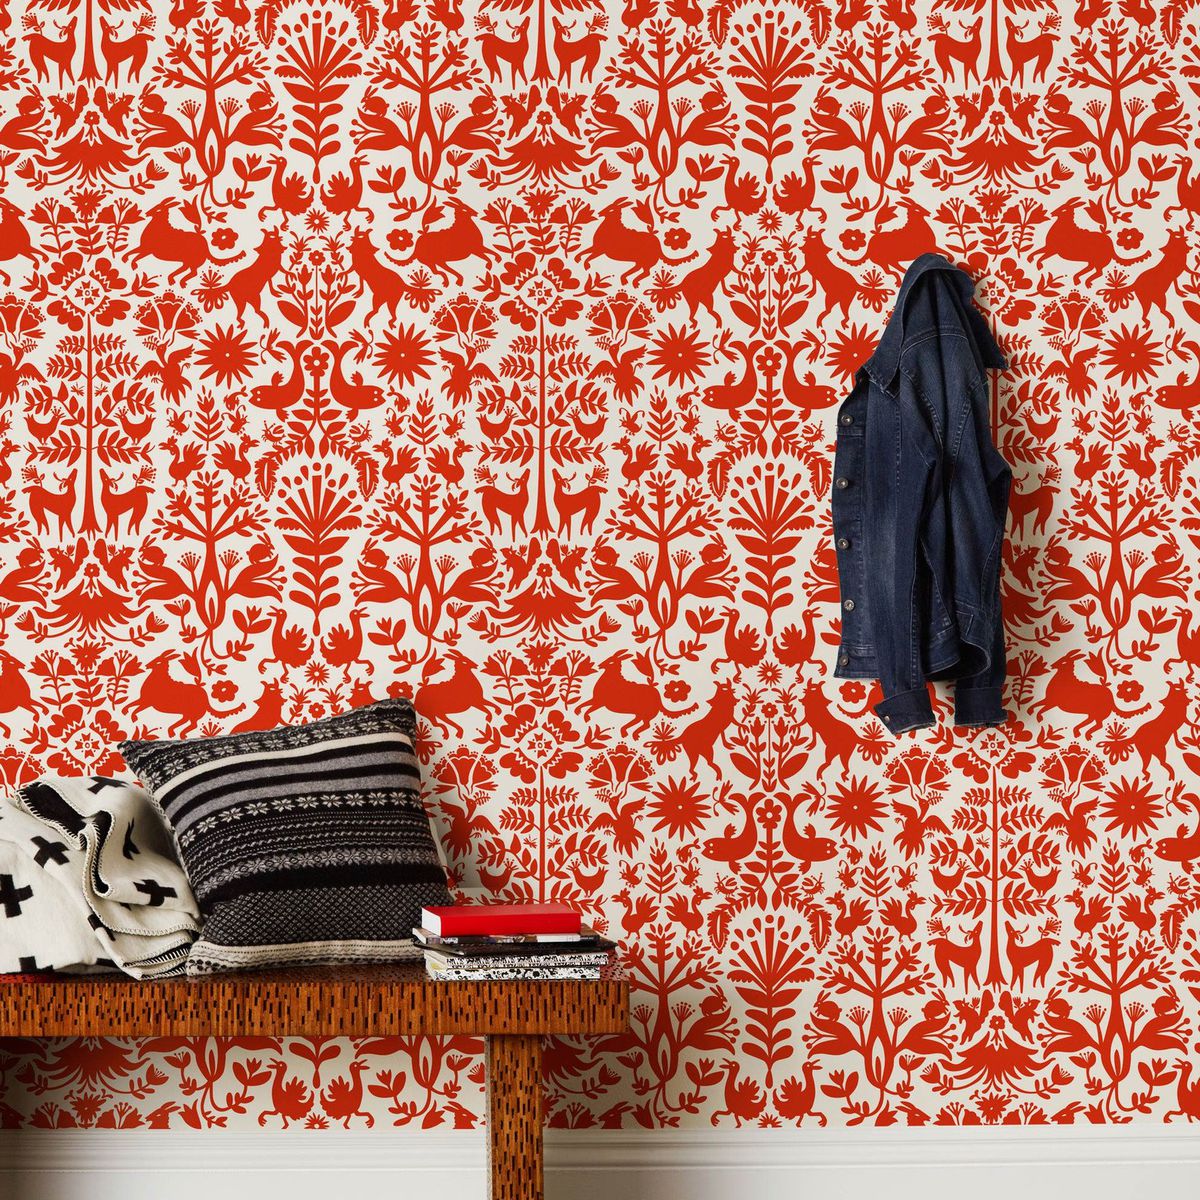 Red wallpaper in a pattern featuring botanicals, flowers, and animals